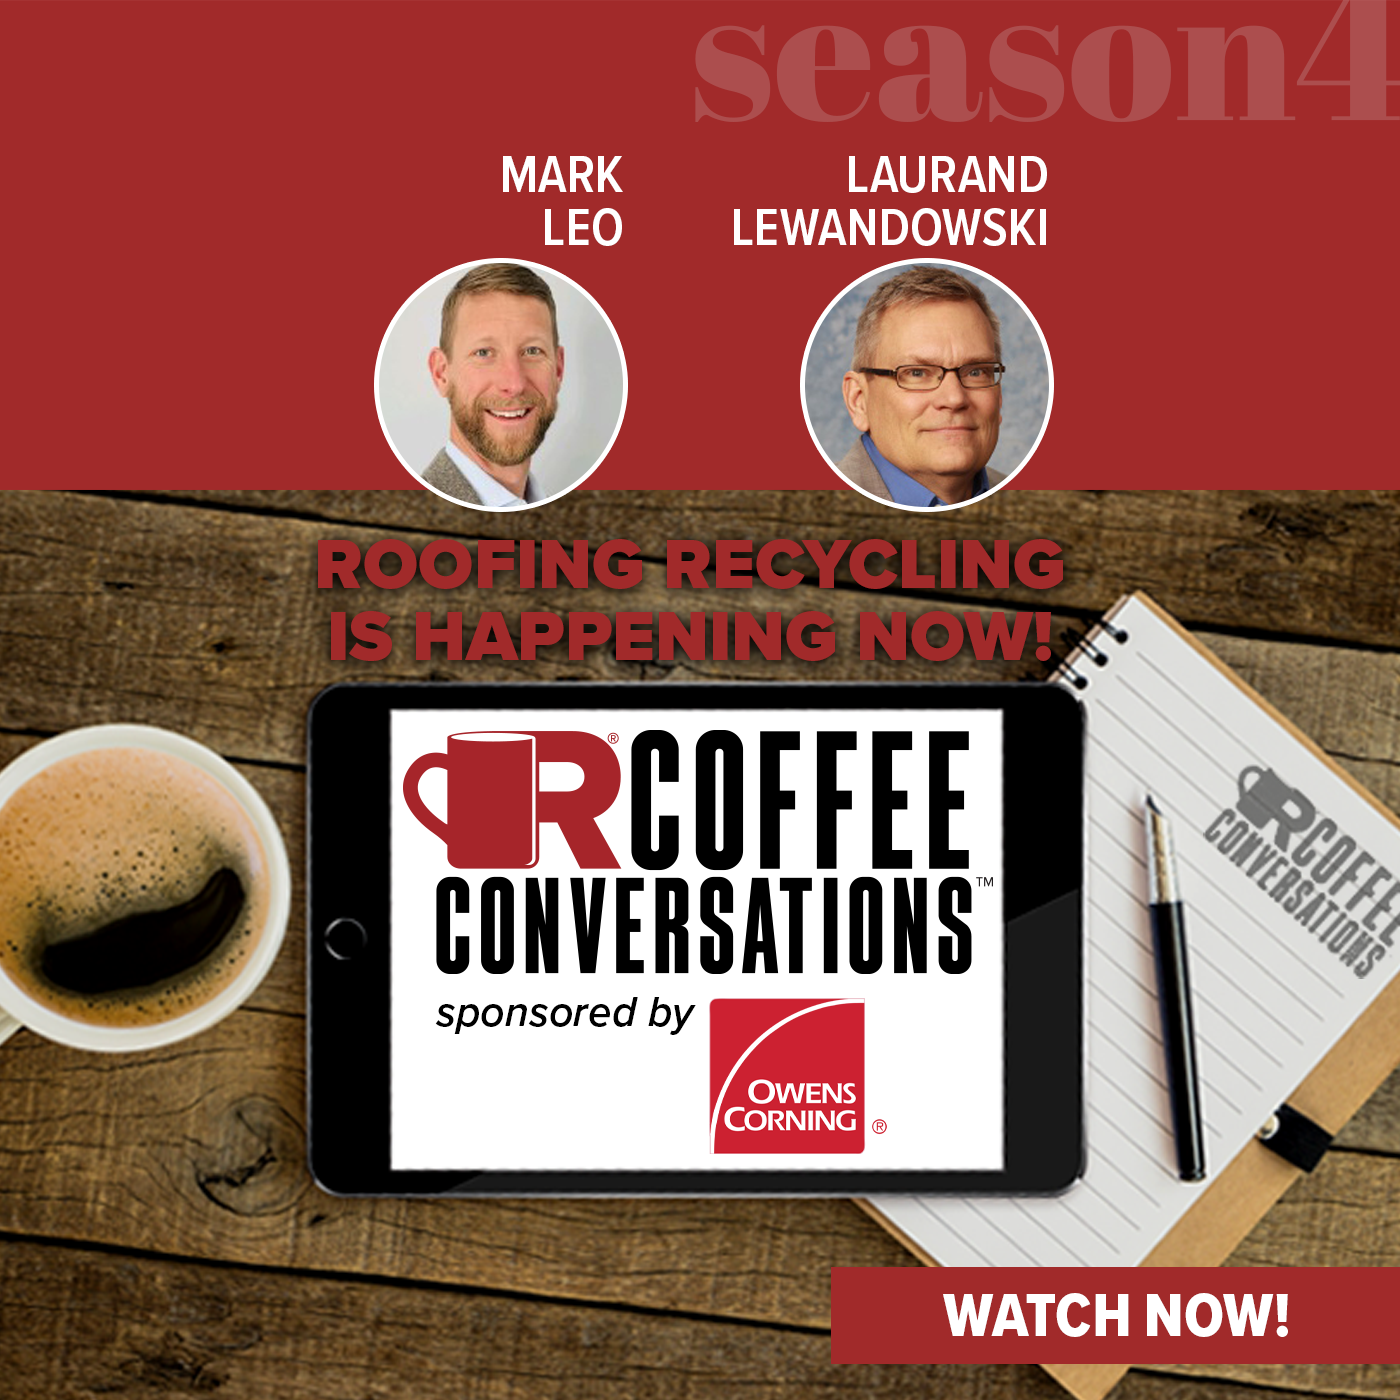 Owens Corning - Coffee Conversations - Roofing Recycling is Happening NOW! - POD